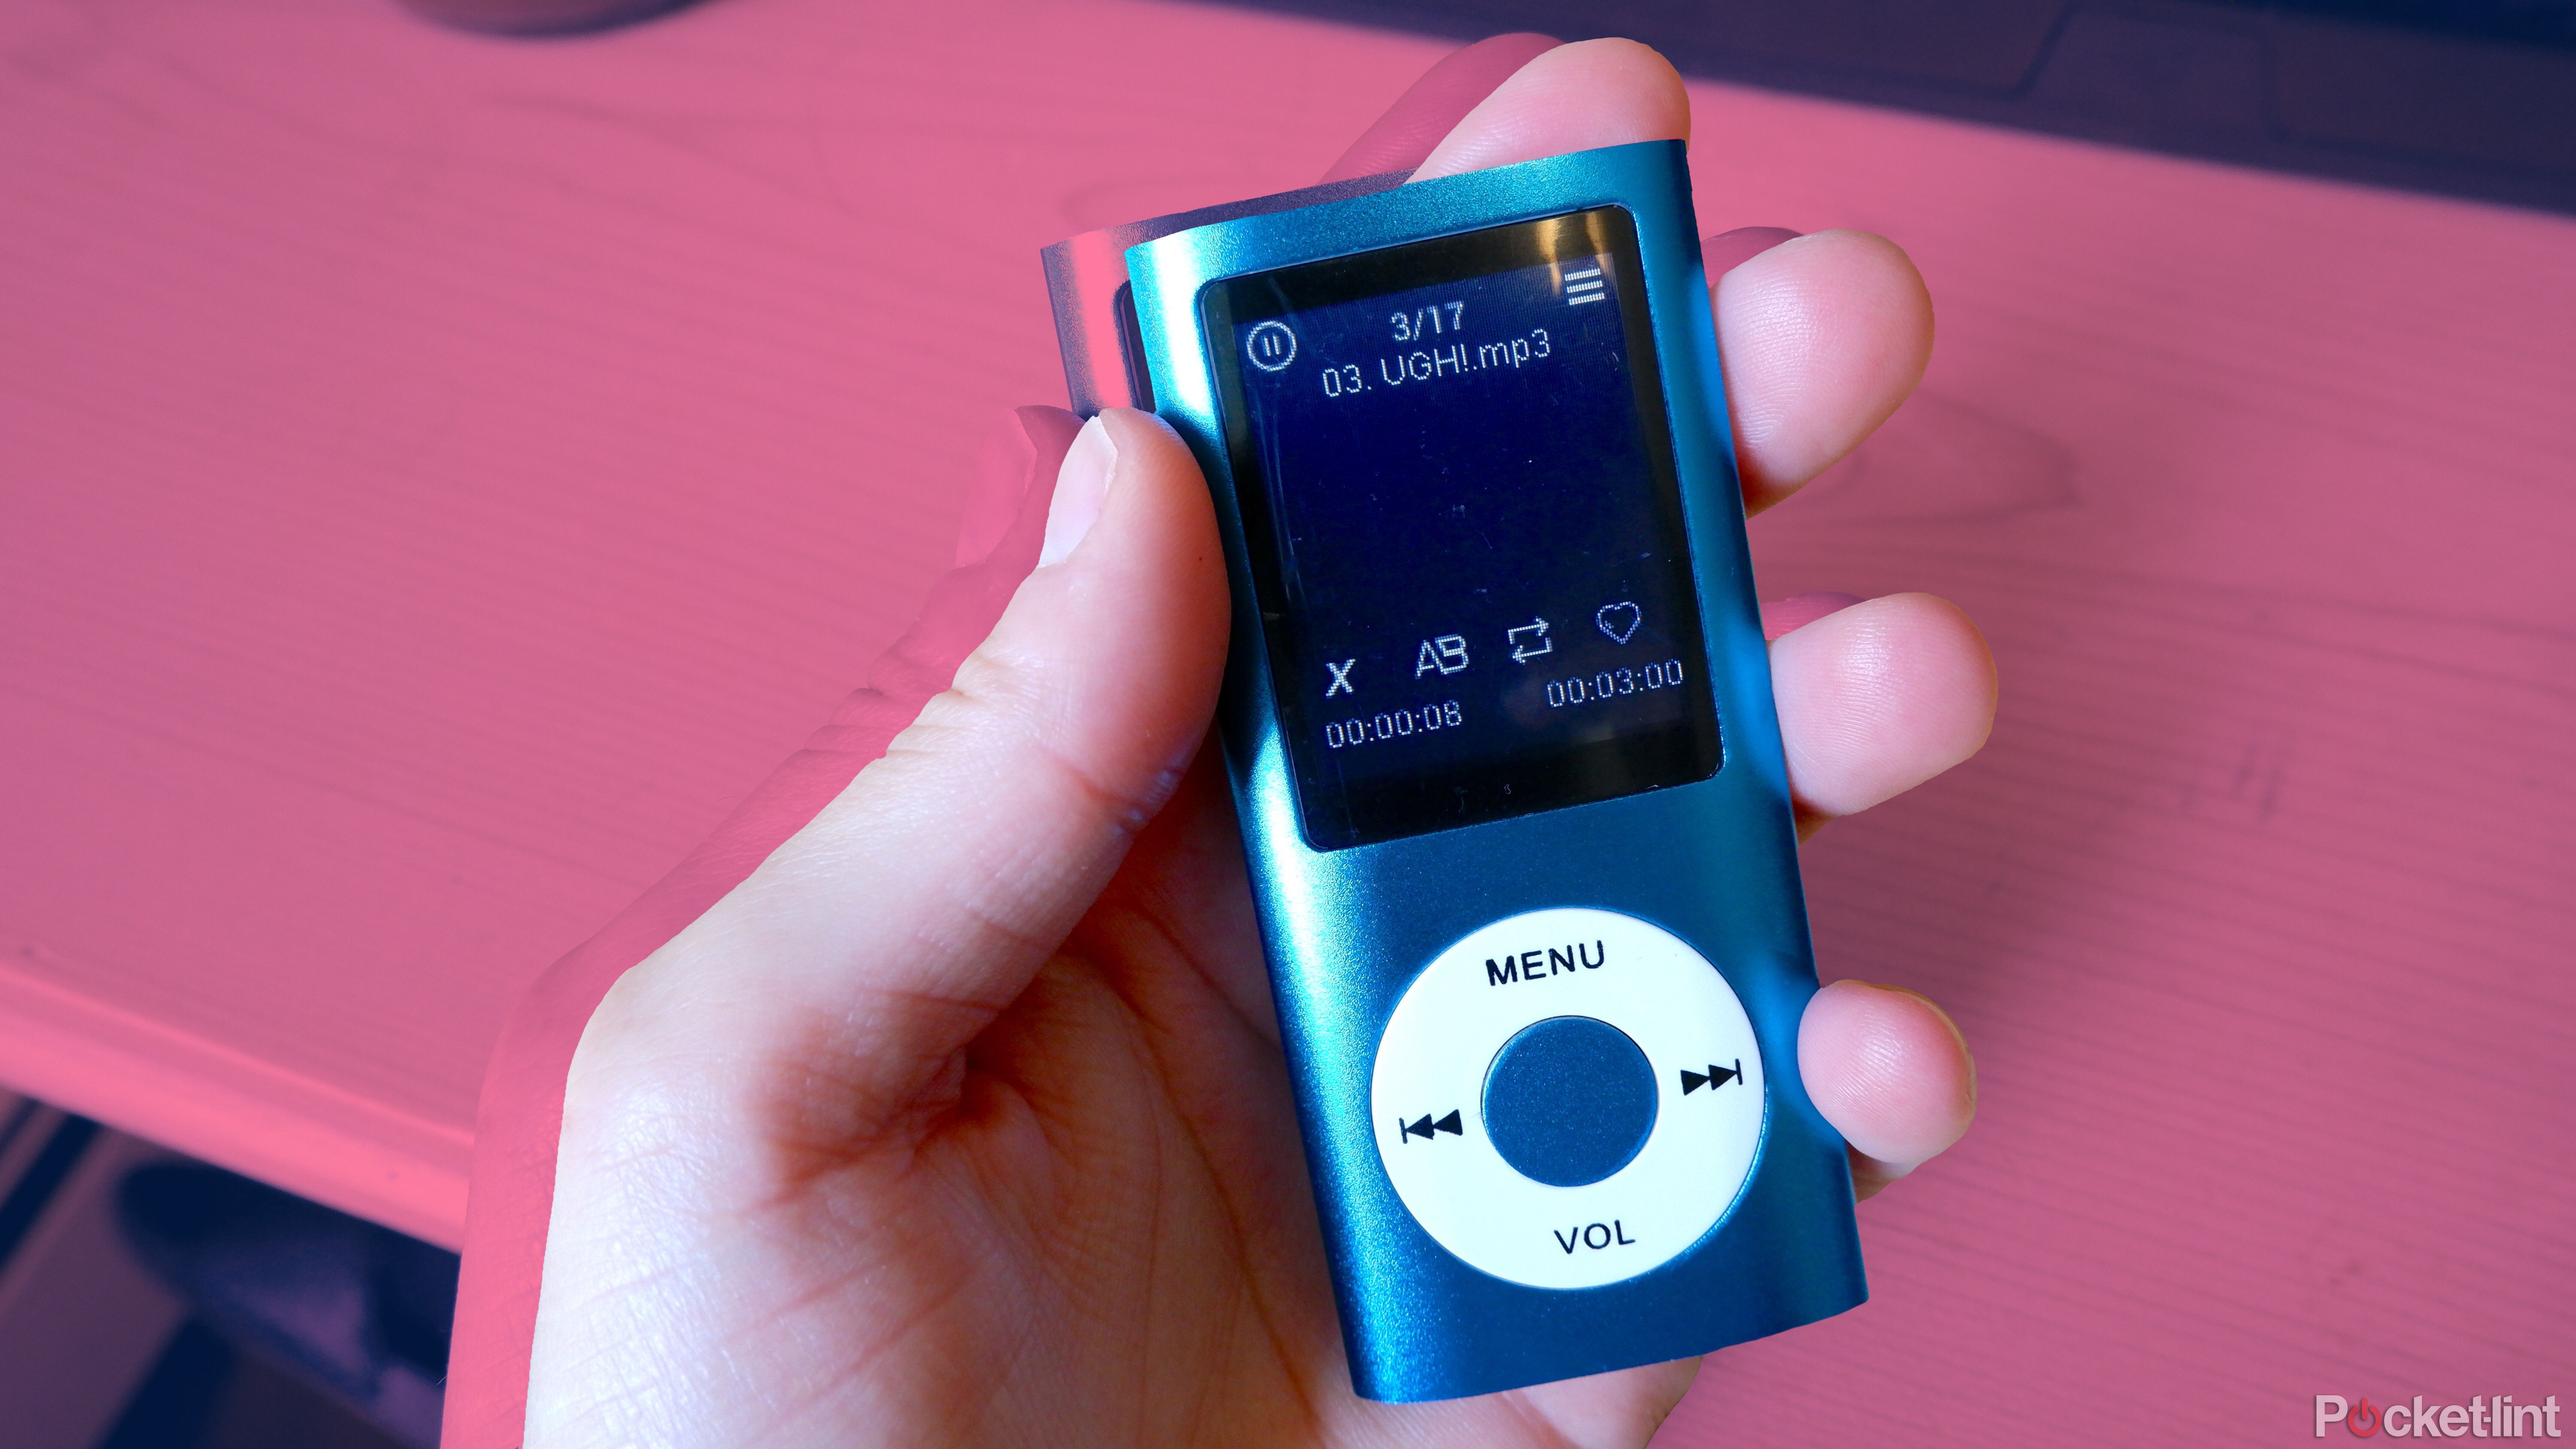 Luqeeg MP3 player review: Not the iPod Nano dupe I was hoping for